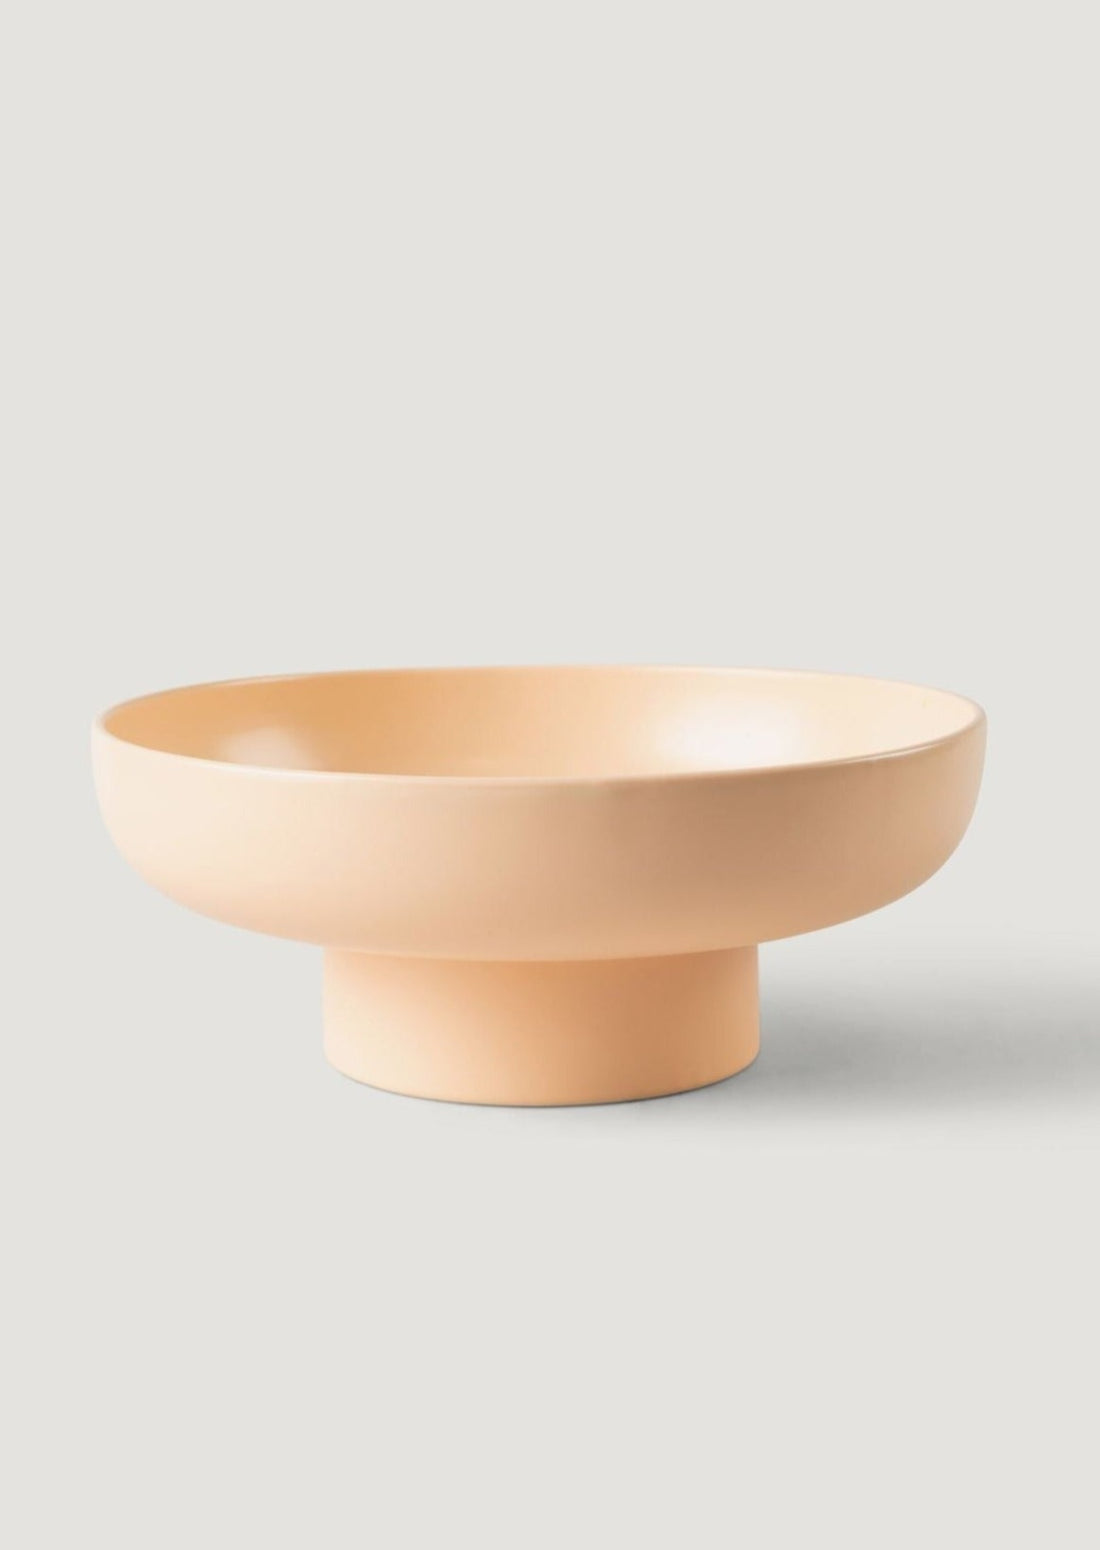 Exclusive Ceramic Carrot Compote Bowl in Creamy Orange at Afloral